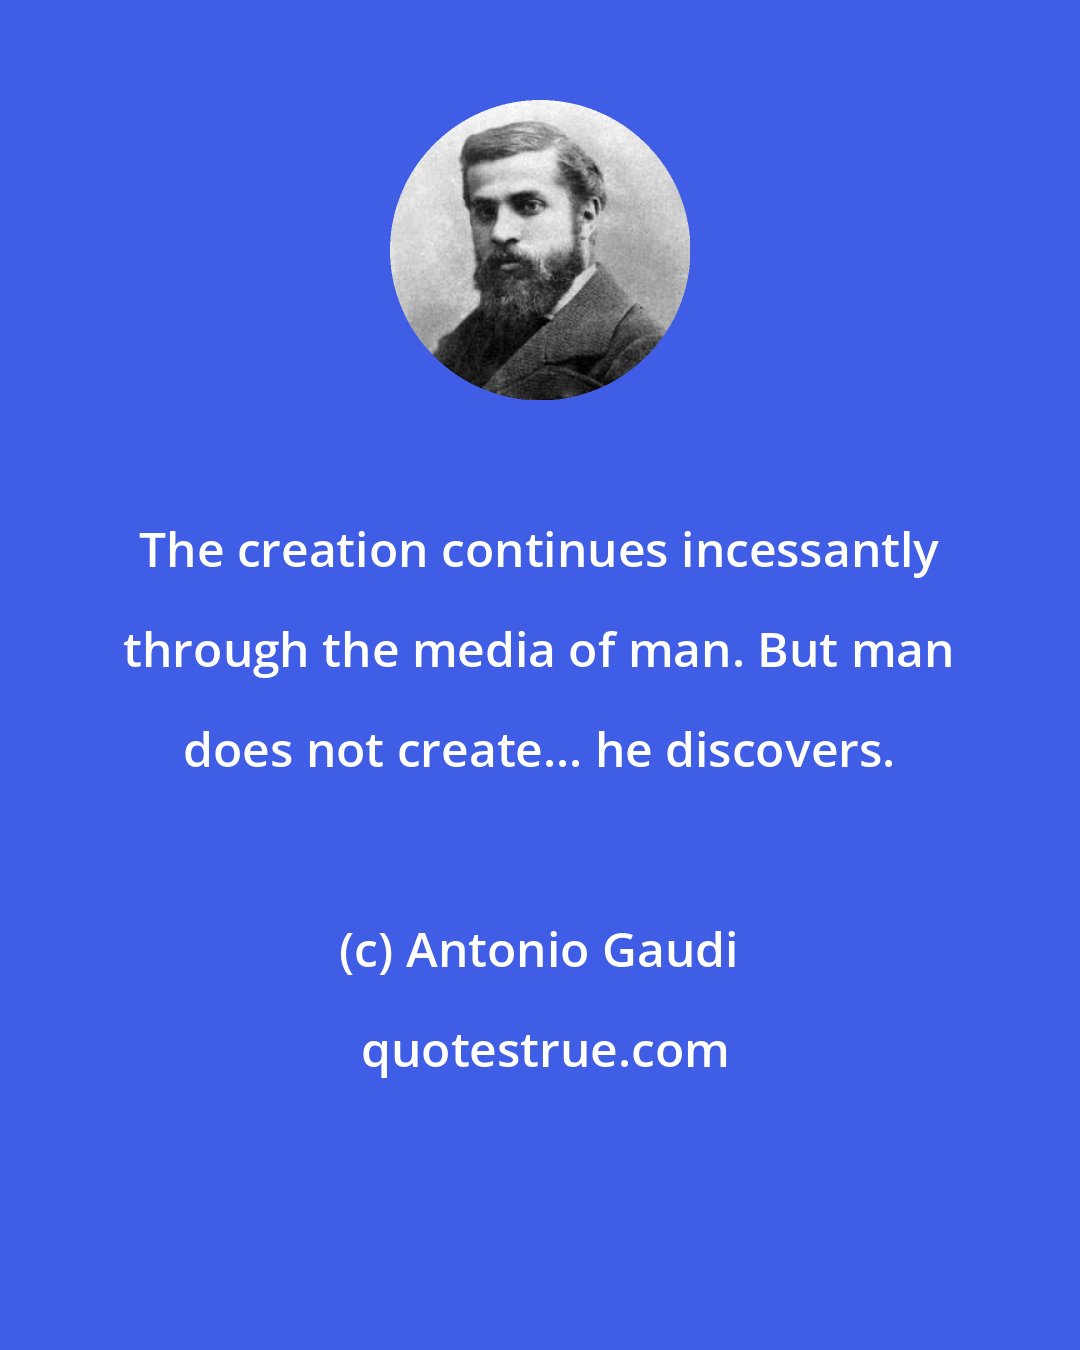 Antonio Gaudi: The creation continues incessantly through the media of man. But man does not create... he discovers.